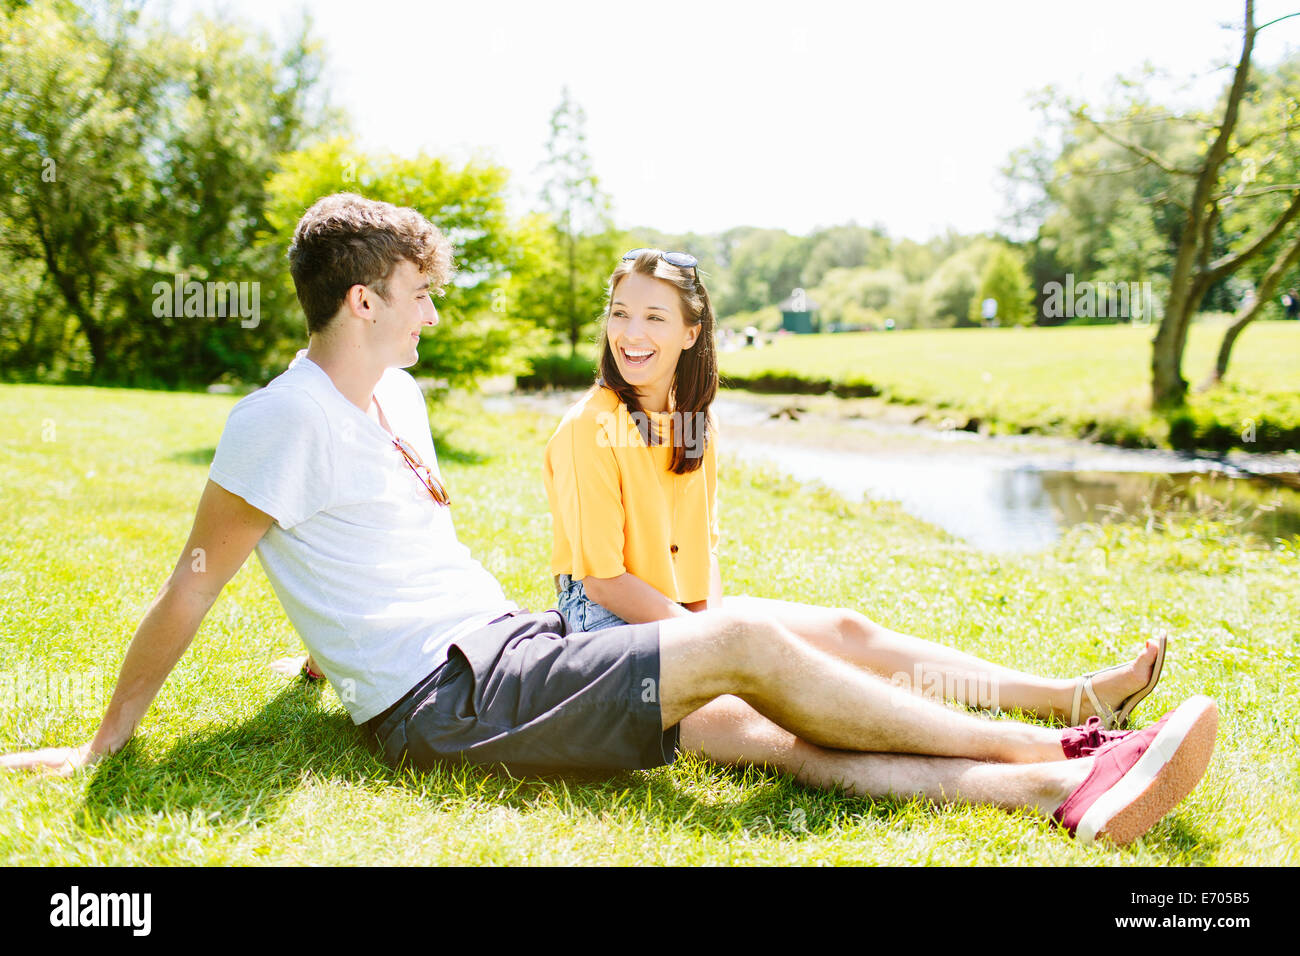 Couple sitting on grass in the park Stock Photo